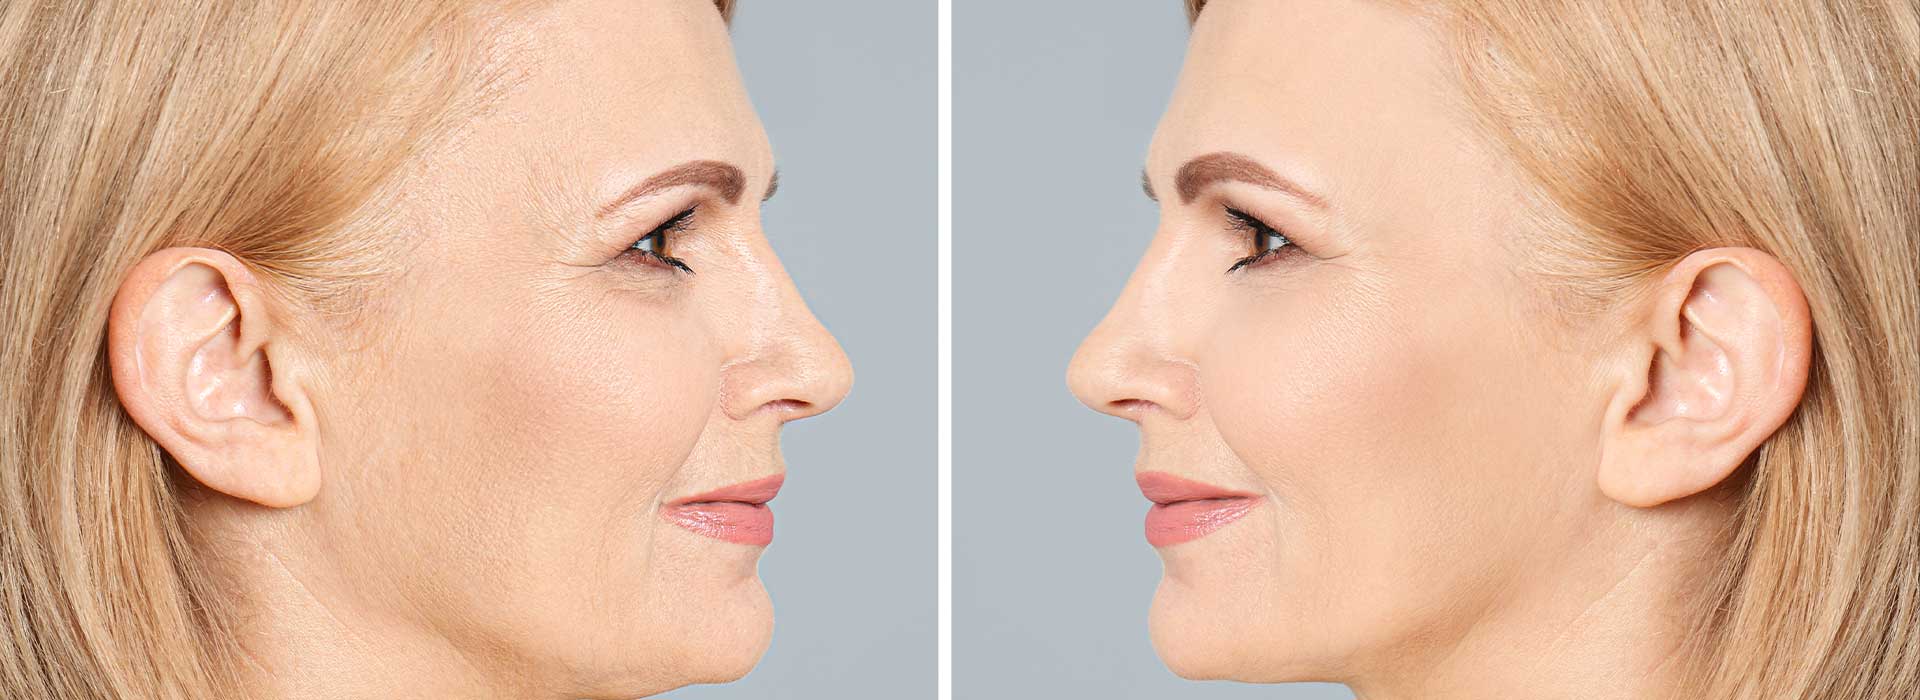 Recontouring with Fillers treatments at Perfect Skin MD